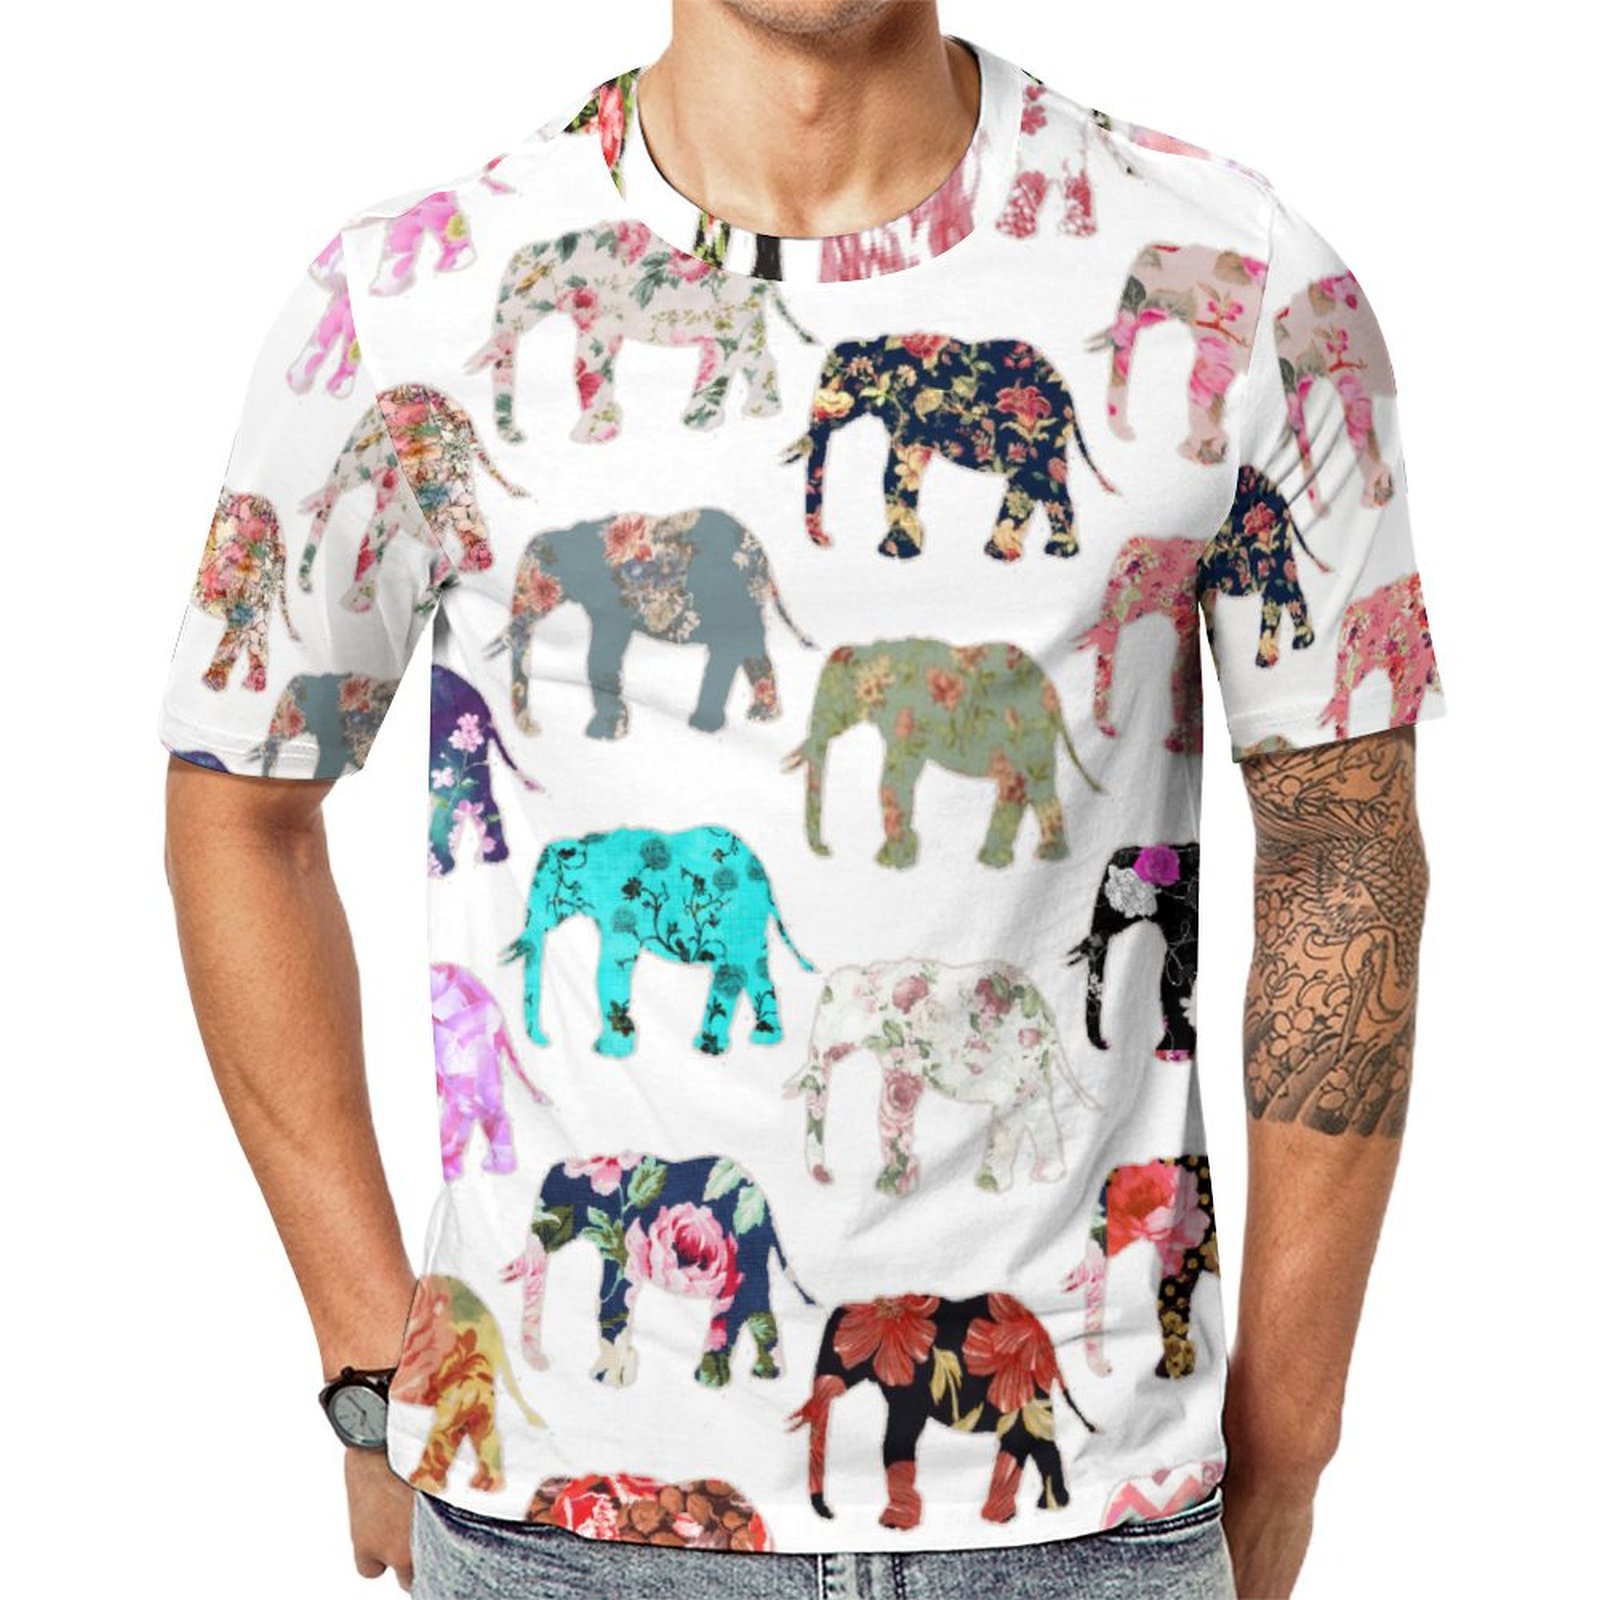 Girly Whimsical Retro Floral Elephants Short Sleeve Print Unisex Tshirt Summer Casual Tees for Men and Women Coolcoshirts